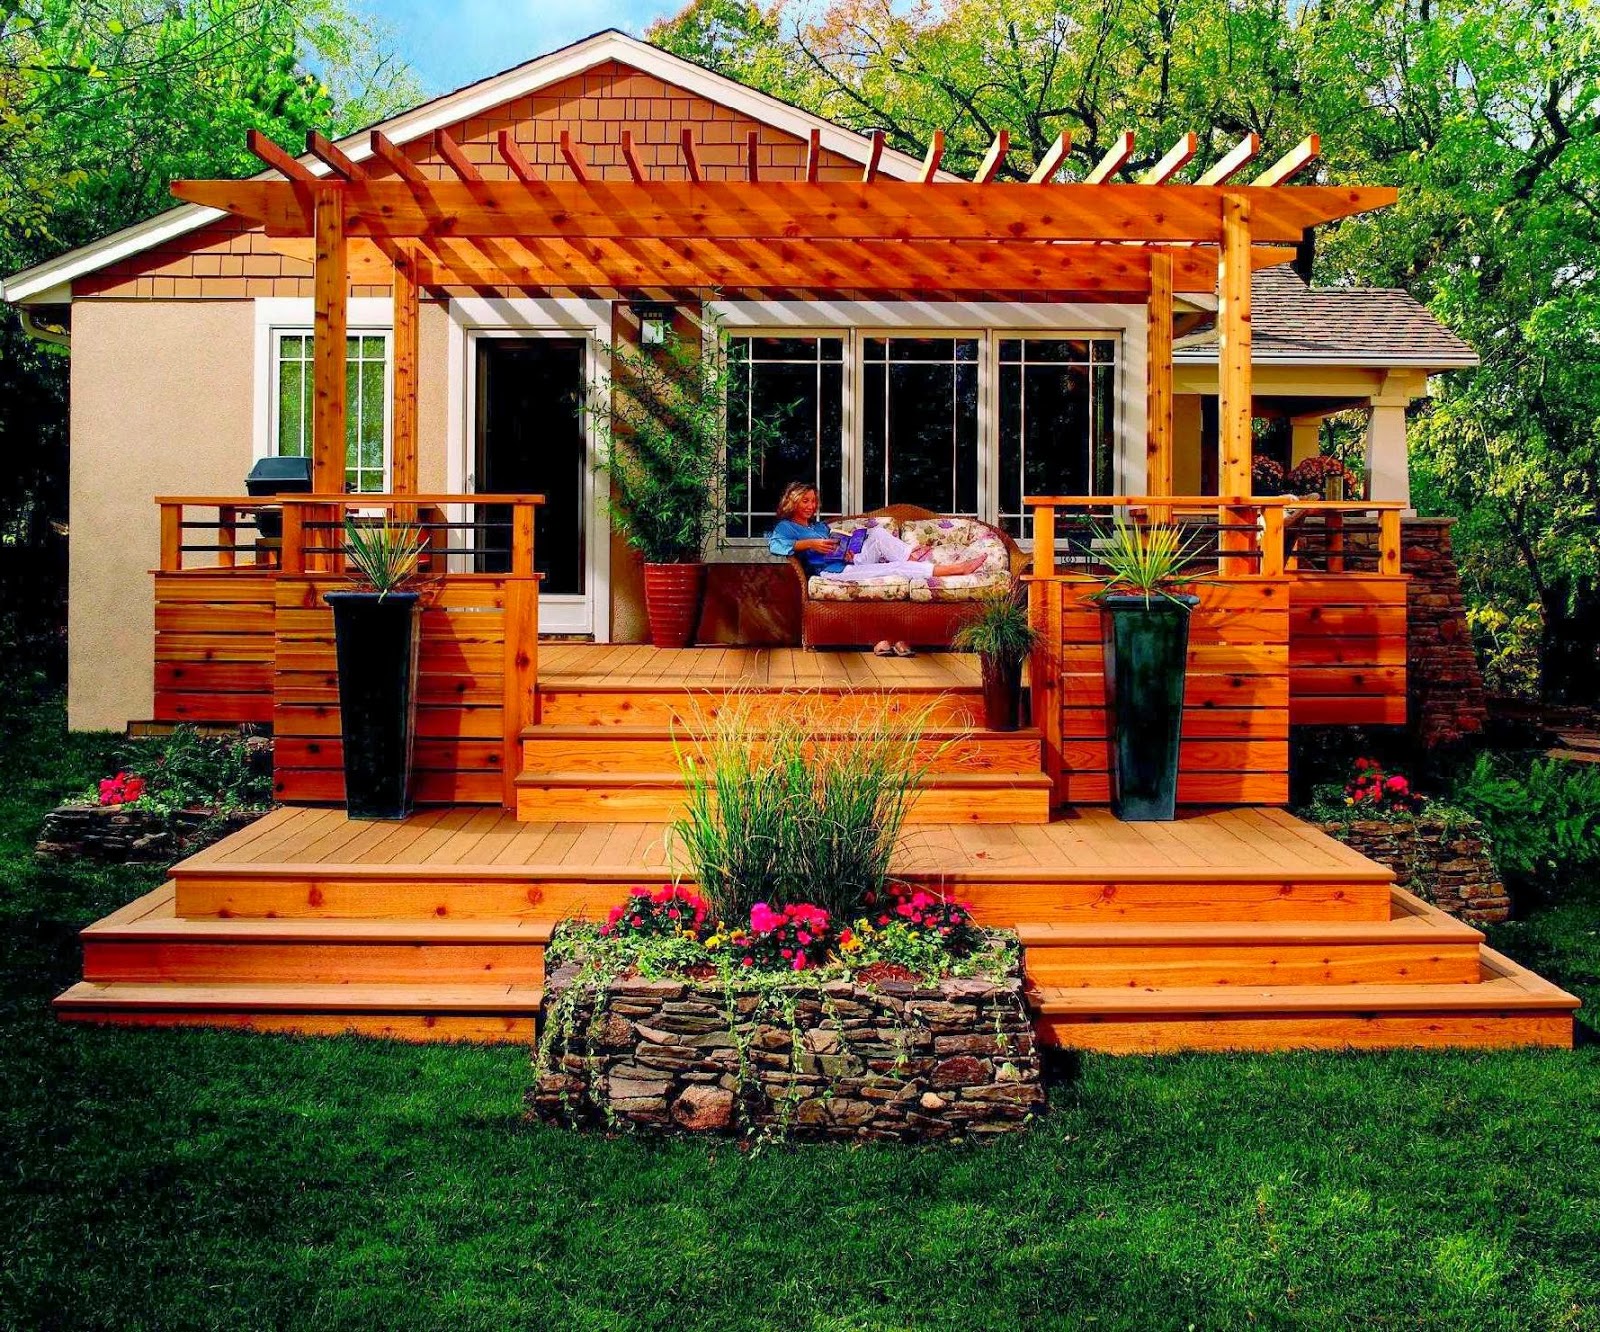 Deck Ideas: 16 Stylish Options For Your Backyard